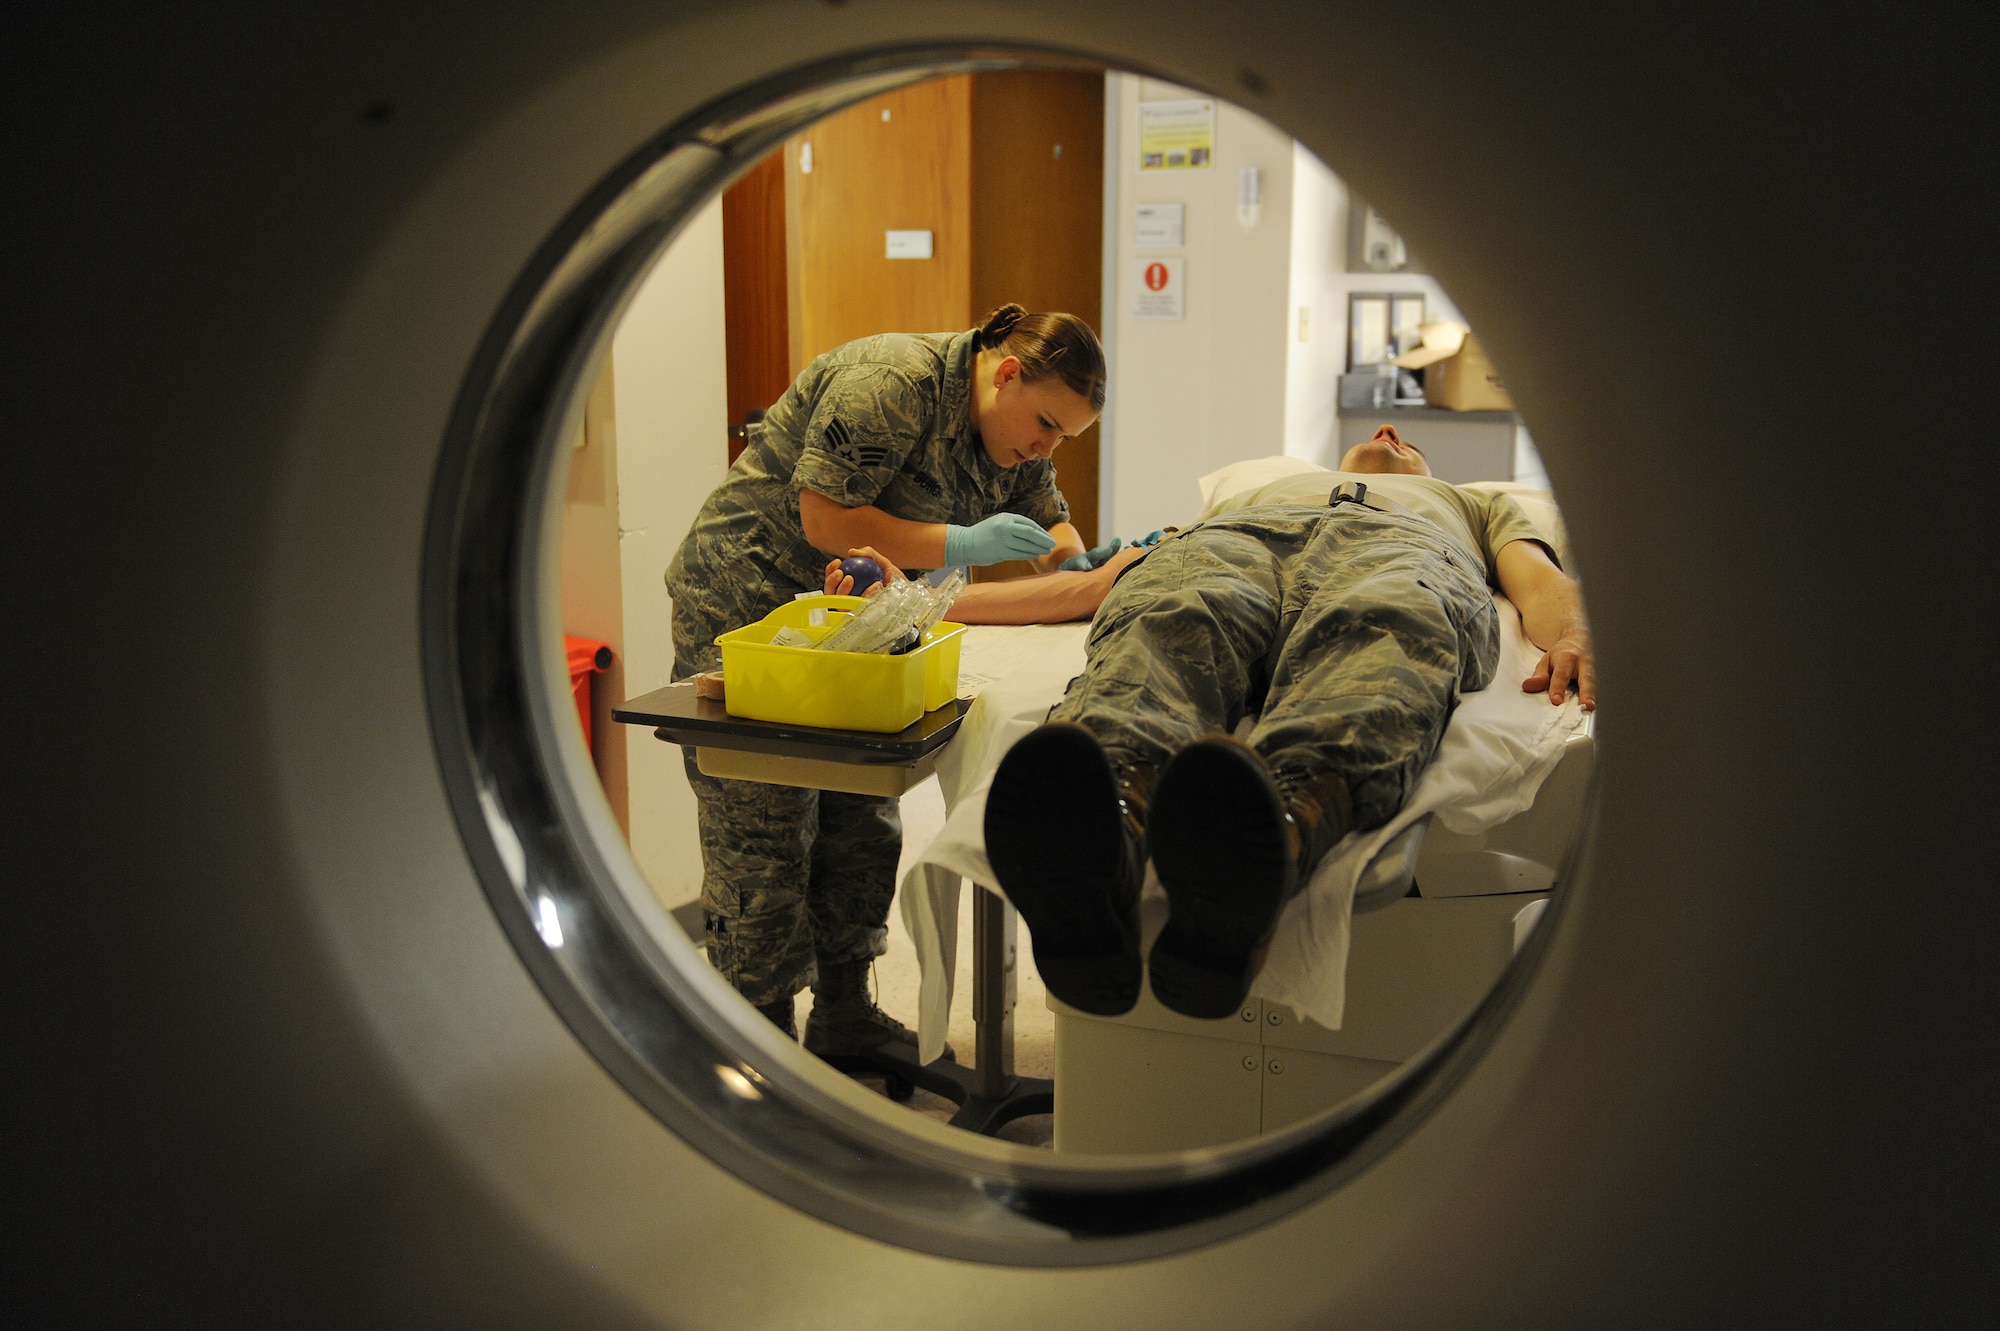 Senior Airman Casey Burch prepares to insert an IV into a patient before going into the CT scan at Scott Air Force Base, Ill., June 3, 2014.  The IV delivers the contrast into the patient’s veins in order to highlight certain areas on the body when it is scanned, which makes it easier for the radiologist to see.  Burch is a 375th Medical Support Squadron radiology technologist.  (U.S. Air Force photo by Staff Sgt. Maria Bowman) by Staff Sgt. Maria Bowman)